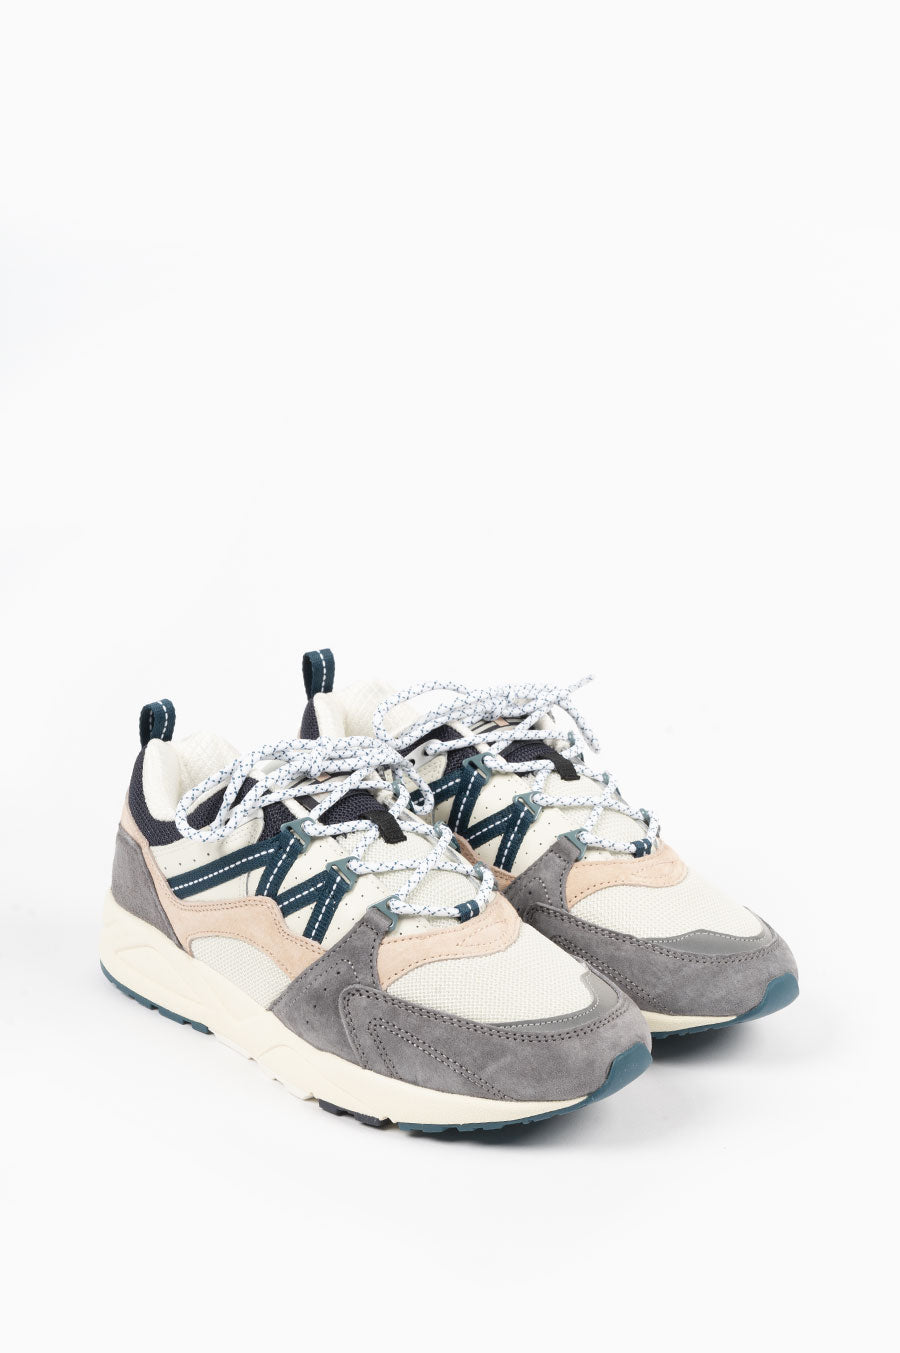 KARHU FUSION 2.0 FROST GRAY BLUE CORAL